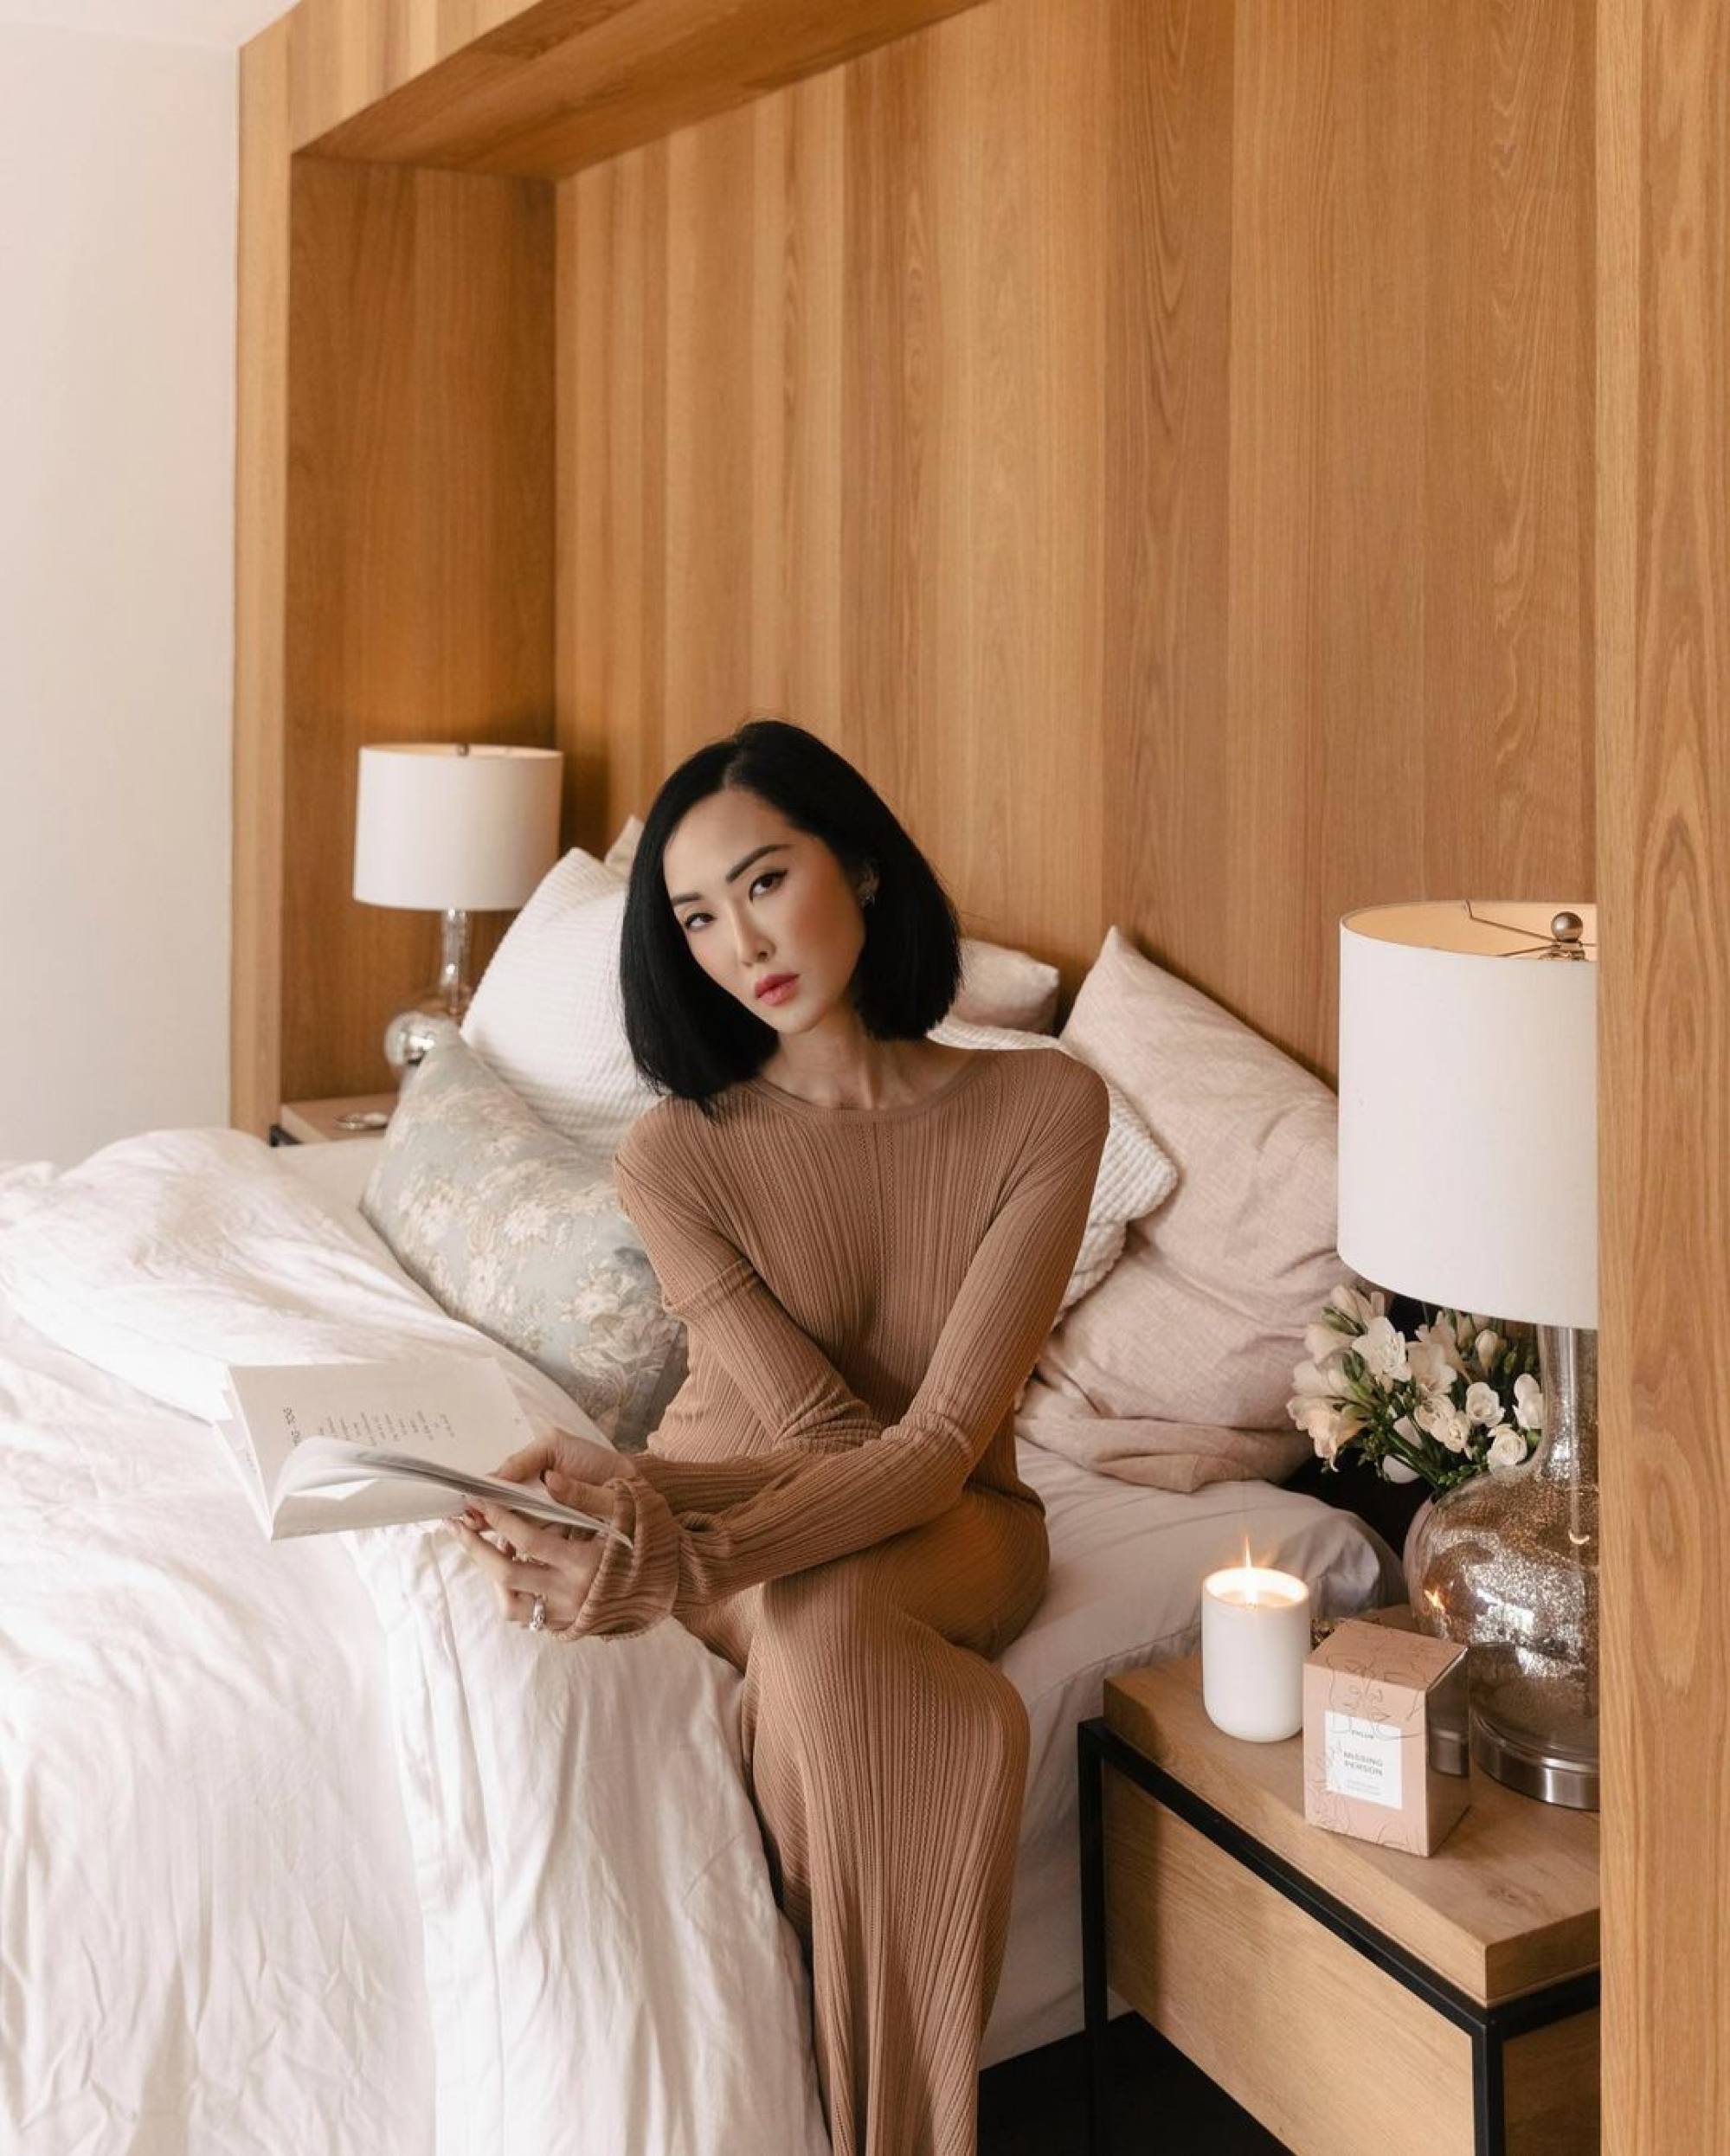 Eileen Gu on fashion, fame and success – the Olympic idol opens up about  discrimination, her Chinese roots, Instagram empowerment and modelling for  Louis Vuitton and Tiffany & Co.